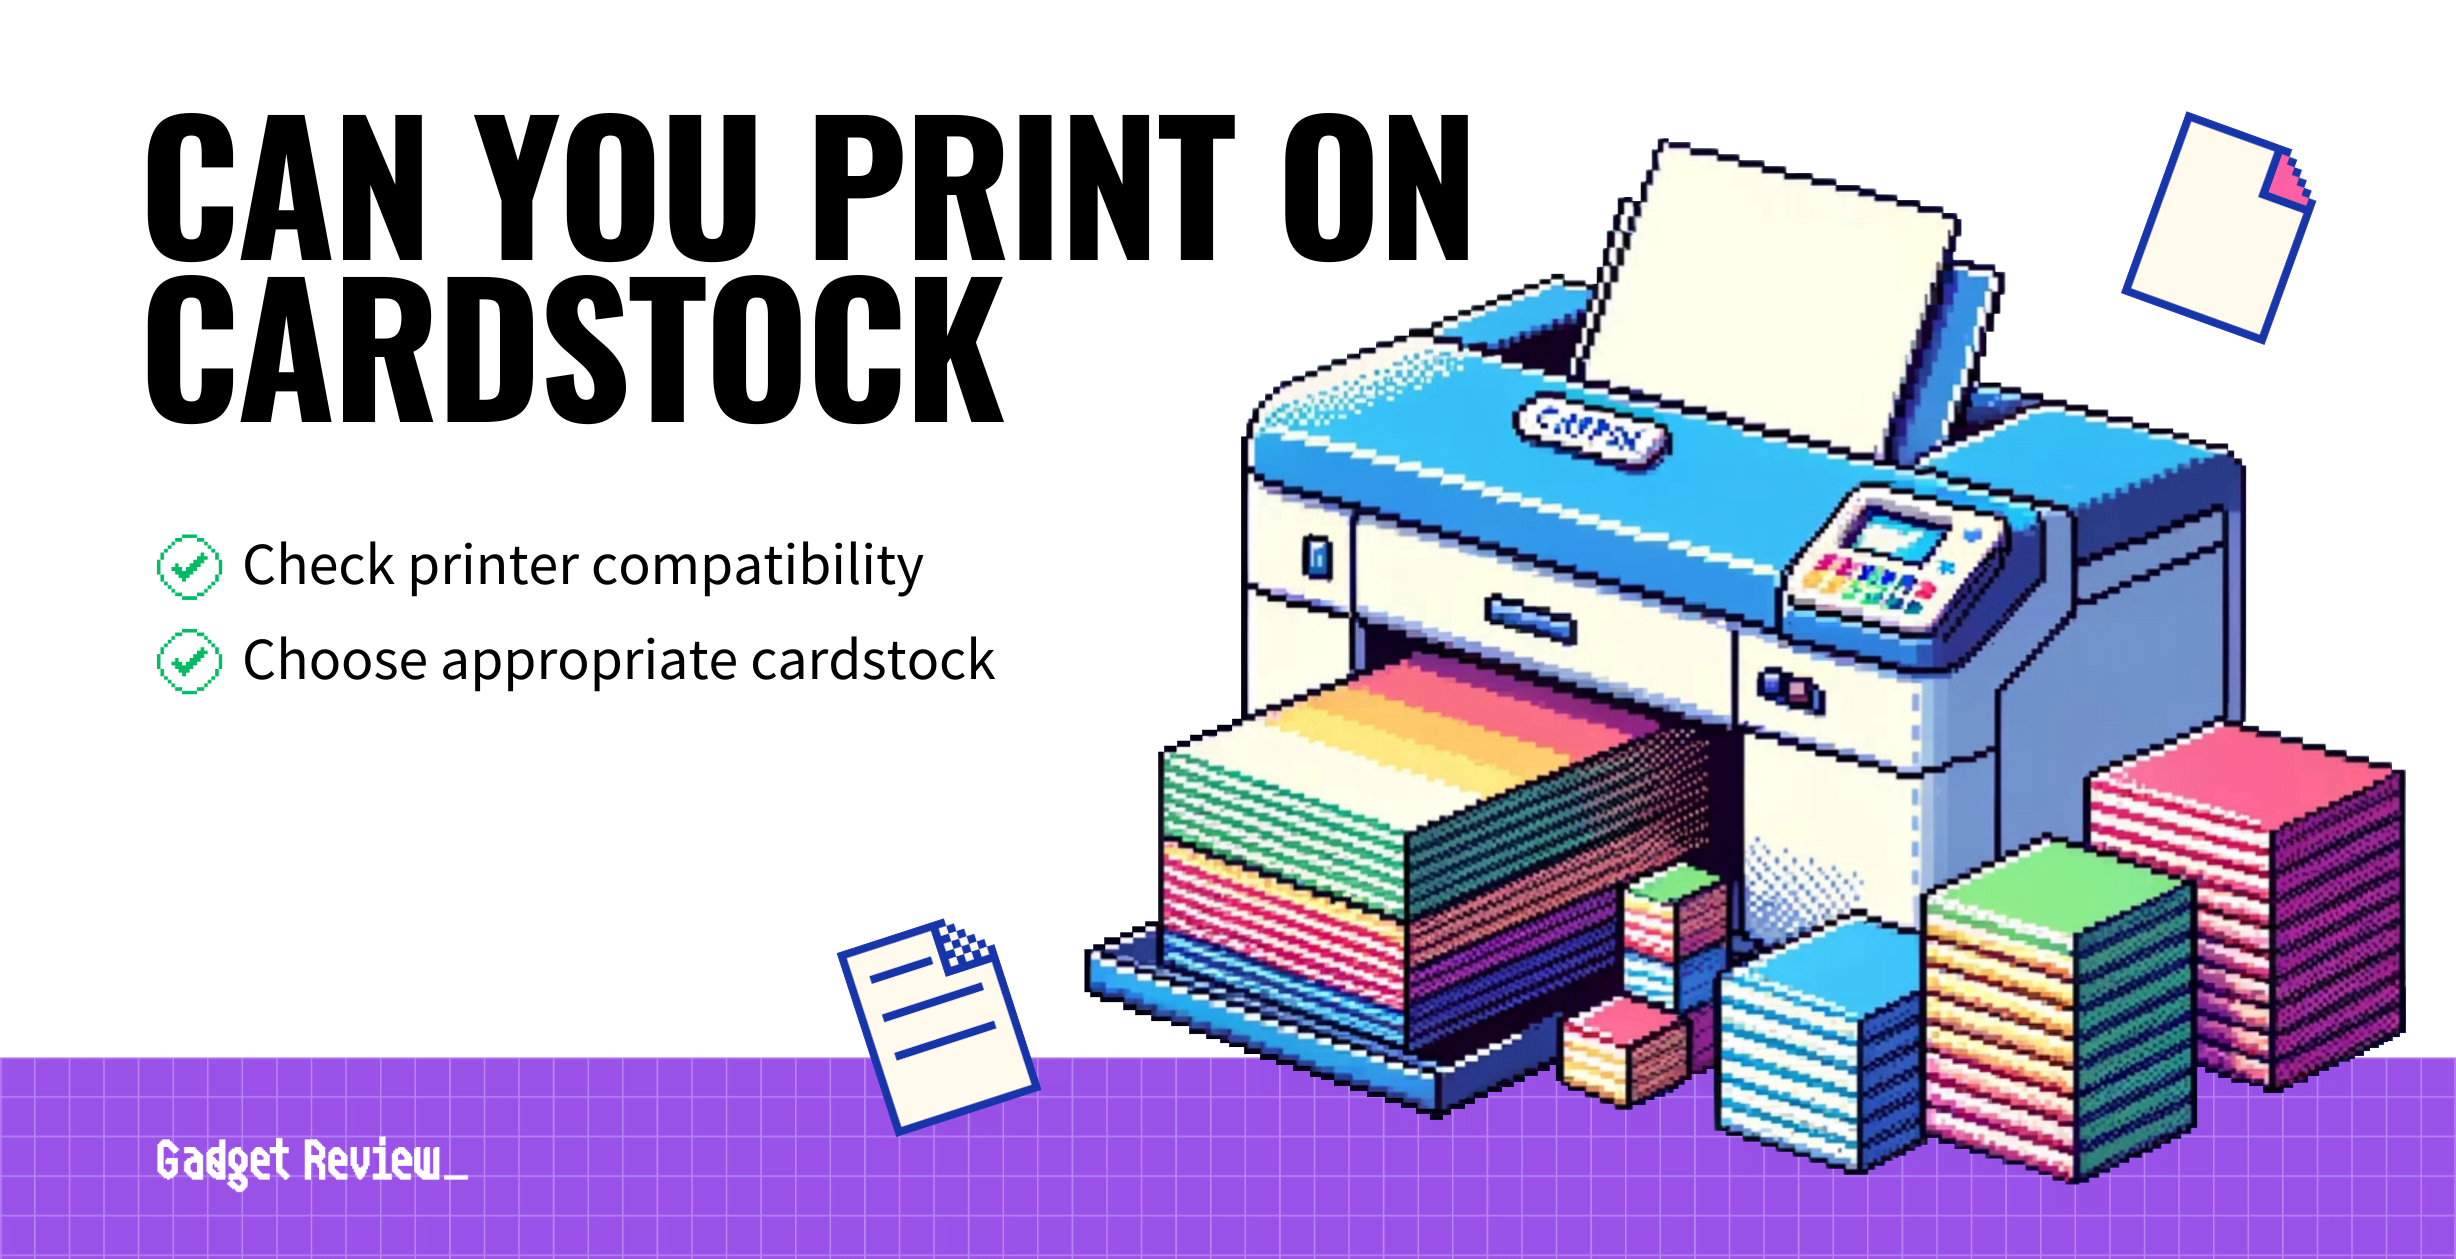 Can You Print on Cardstock?